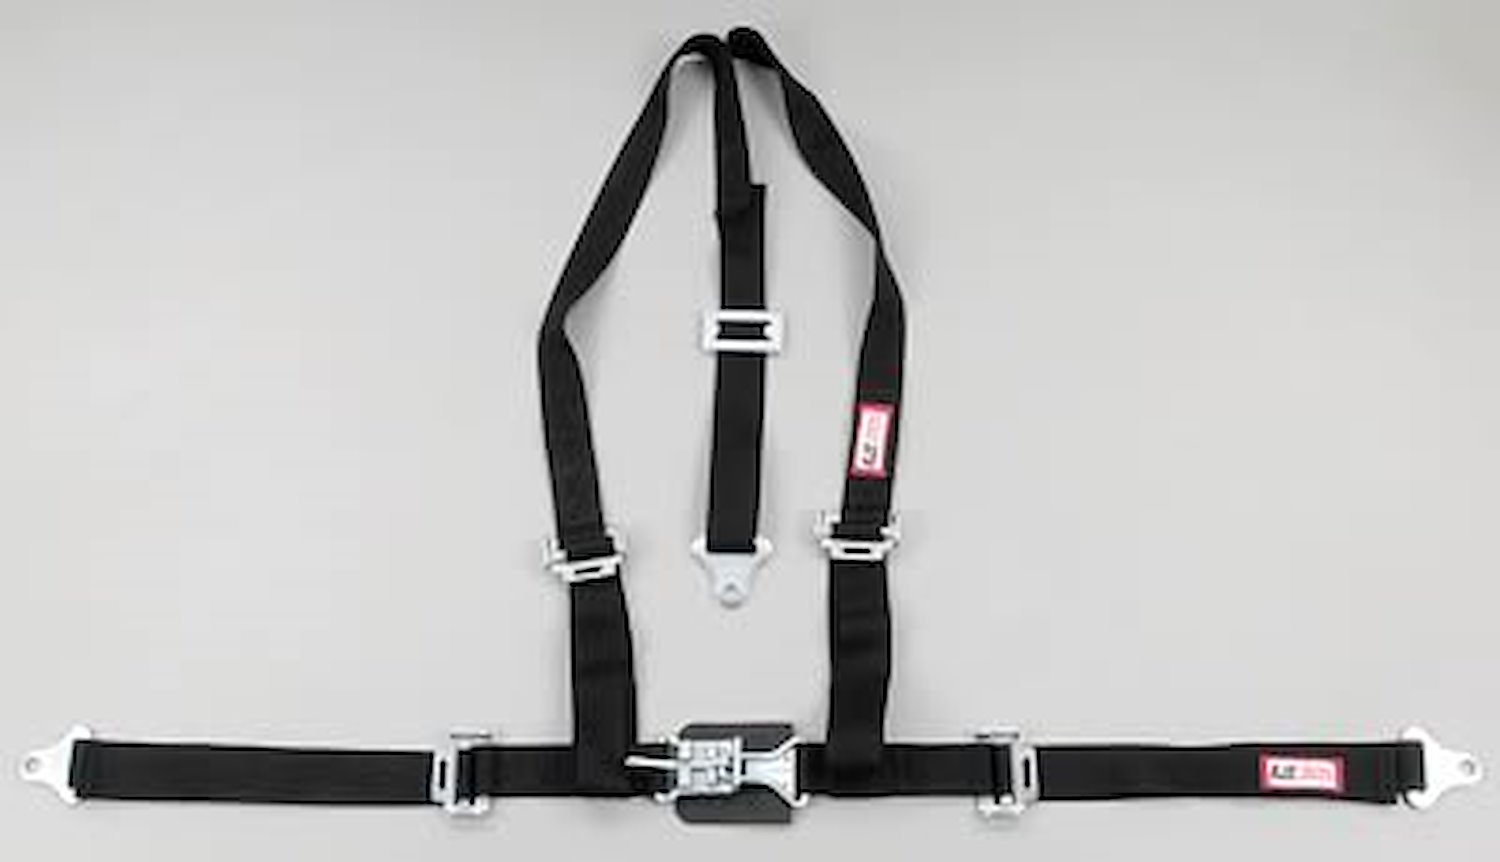 NON-SFI L&L HARNESS 3 PULL UP Lap Belt SEWN IN 2 S.H. Individual FLOOR Mount w/STERNUM STRAP ALL WRAP ENDS GRAY